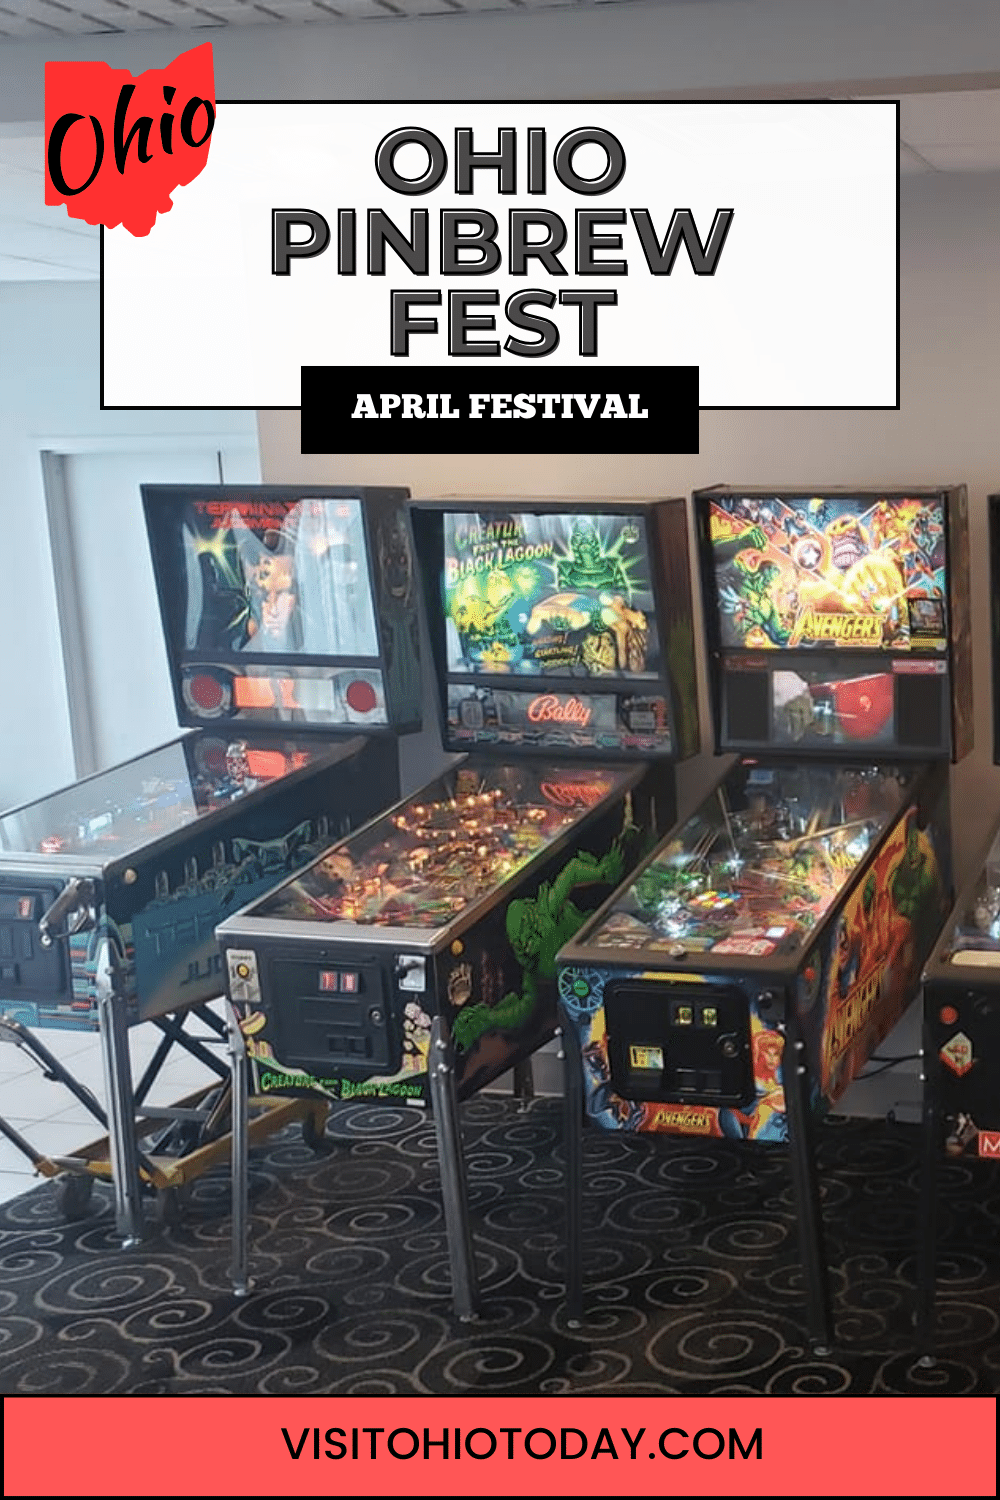 The Ohio PinBrew Fest, in early April, showcases pinball machines, arcades, free play, tournaments, and more.